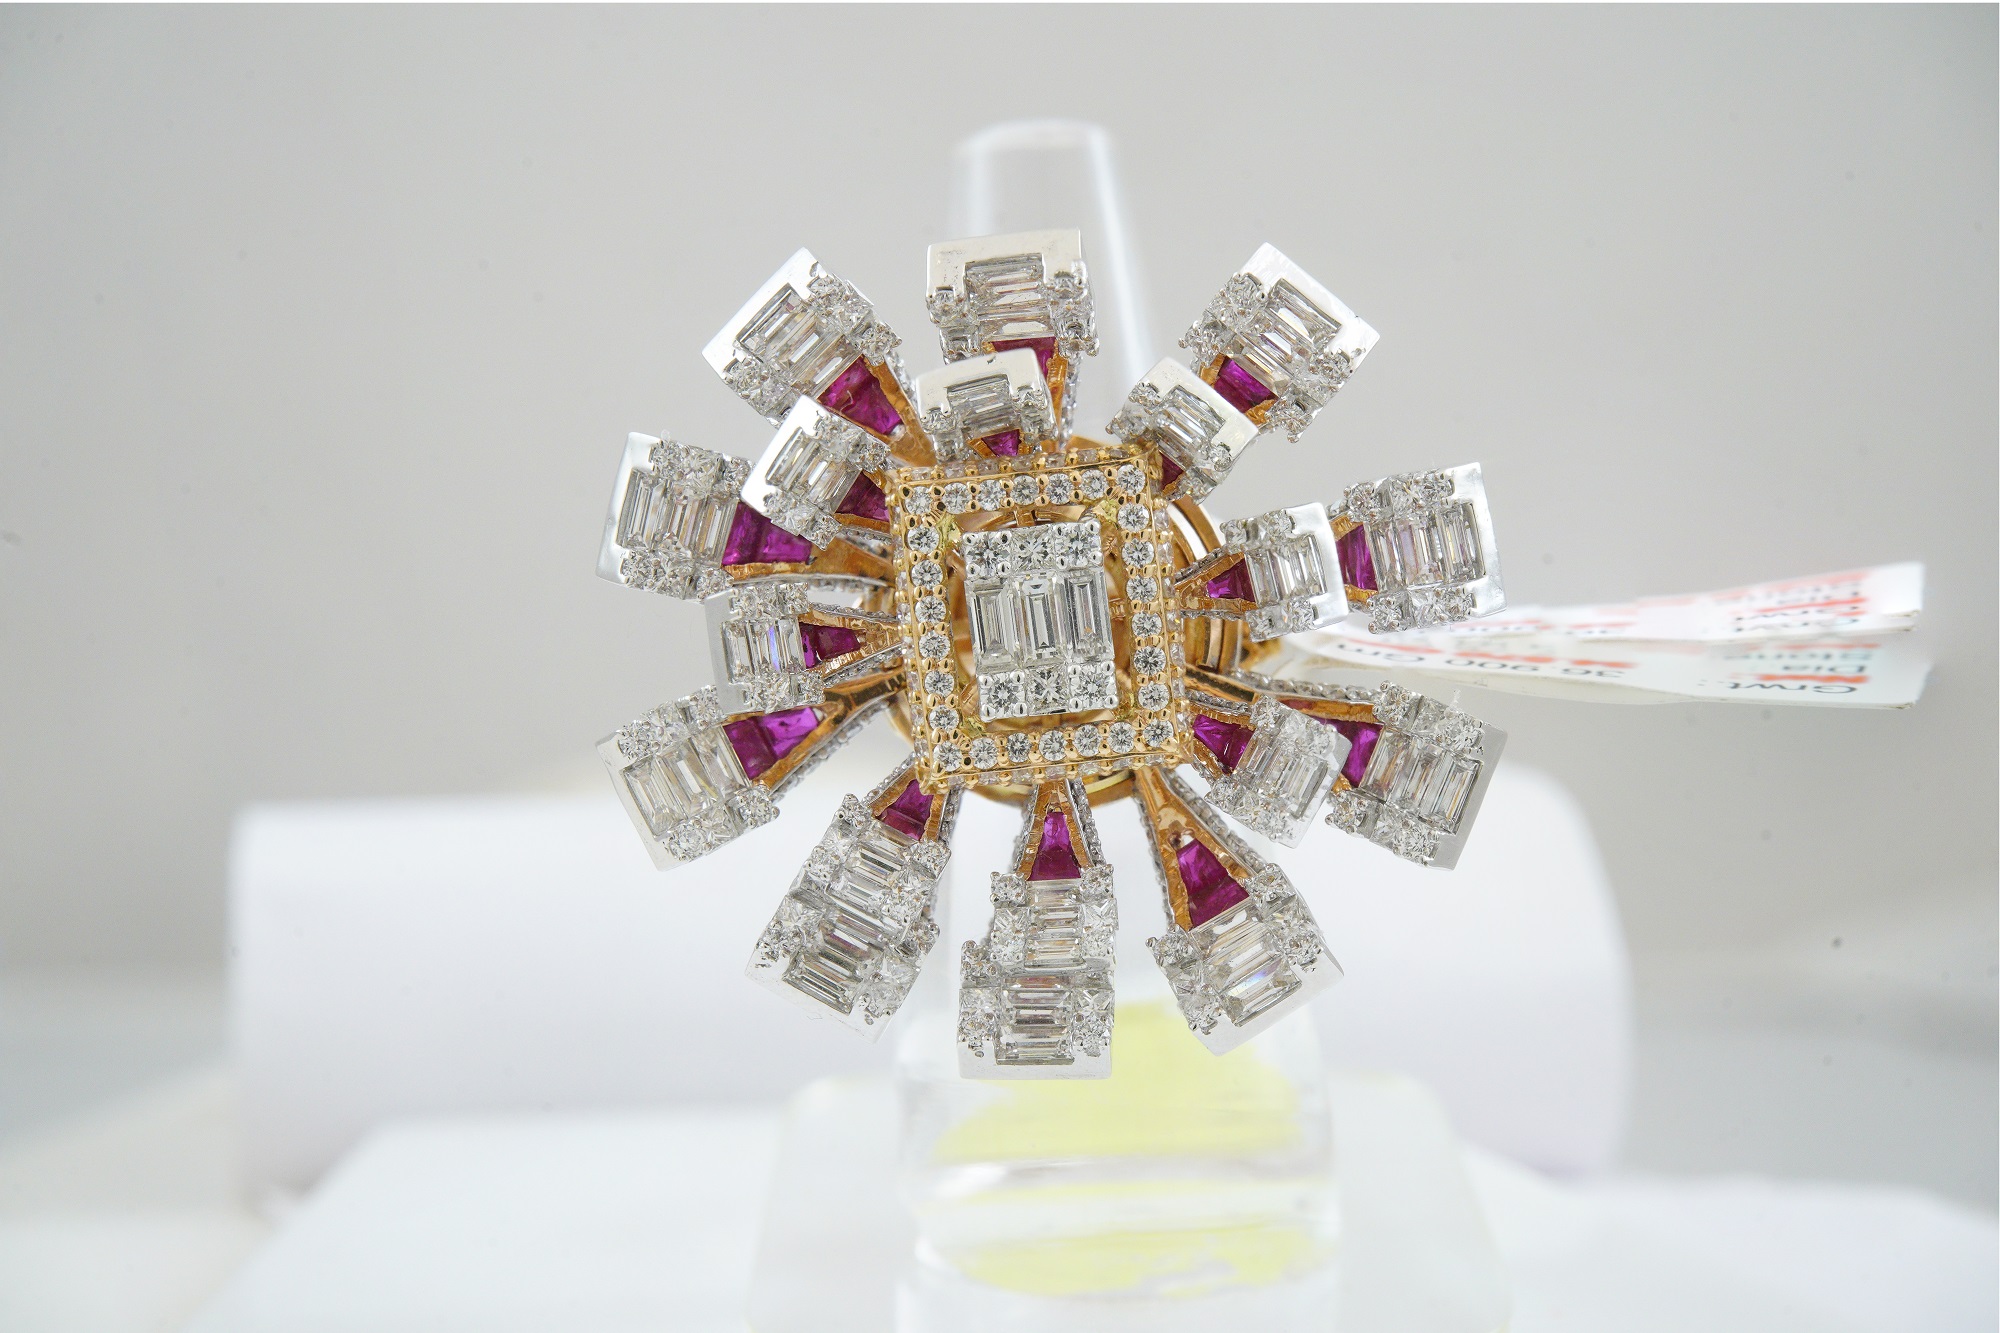 _Classy Rakha Bandhan gifts for your sister by Jewellery Designer Archana Aggarwal (9)